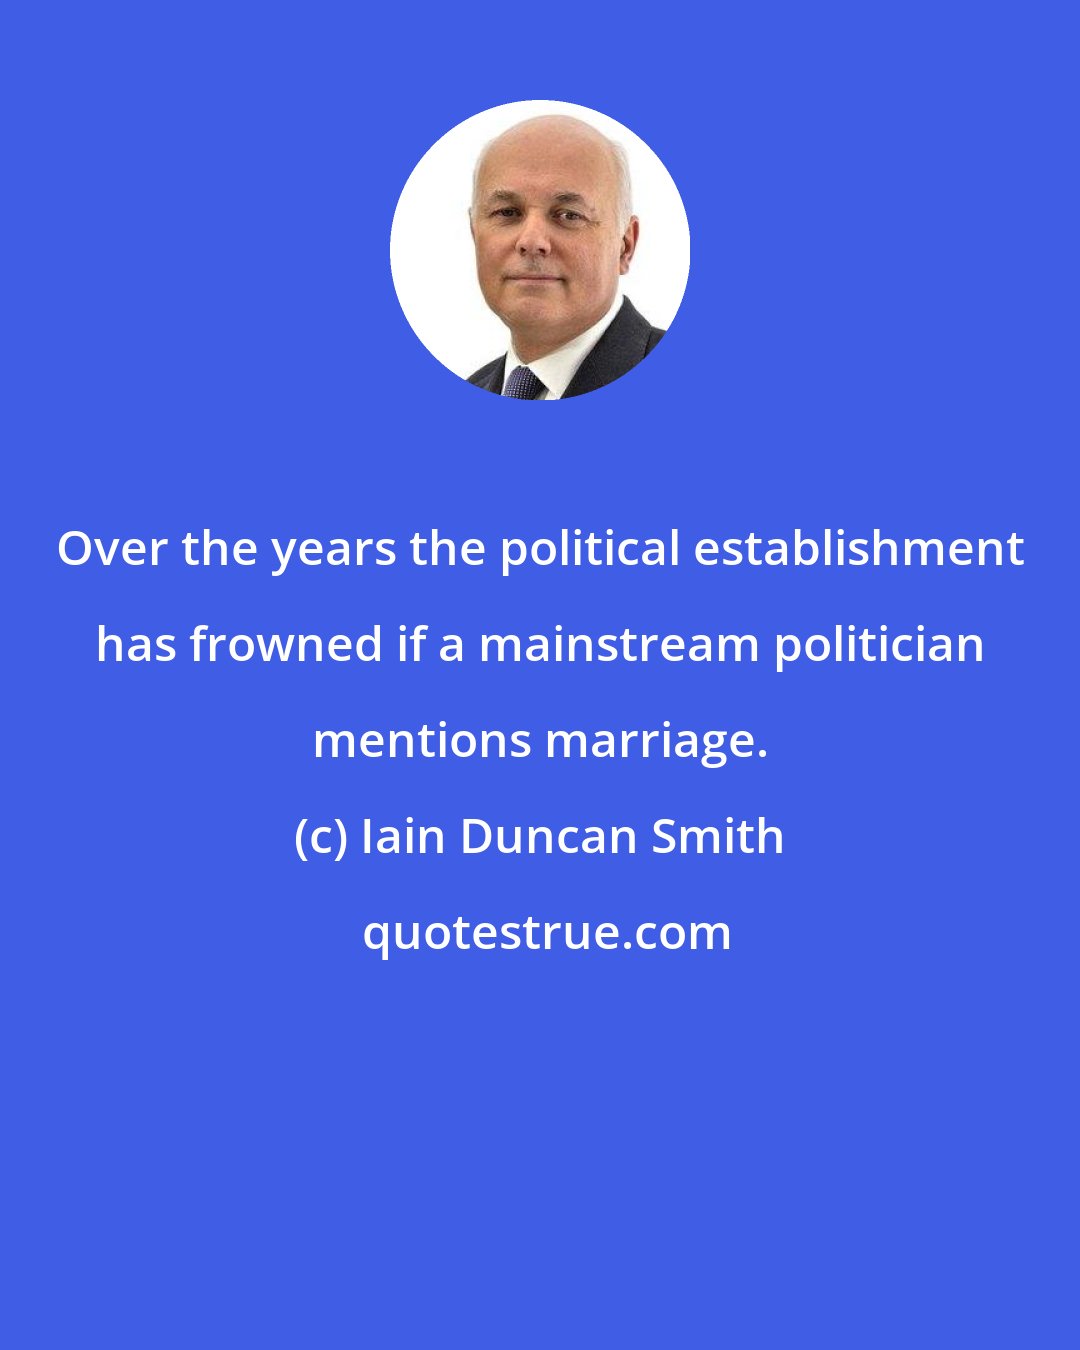 Iain Duncan Smith: Over the years the political establishment has frowned if a mainstream politician mentions marriage.